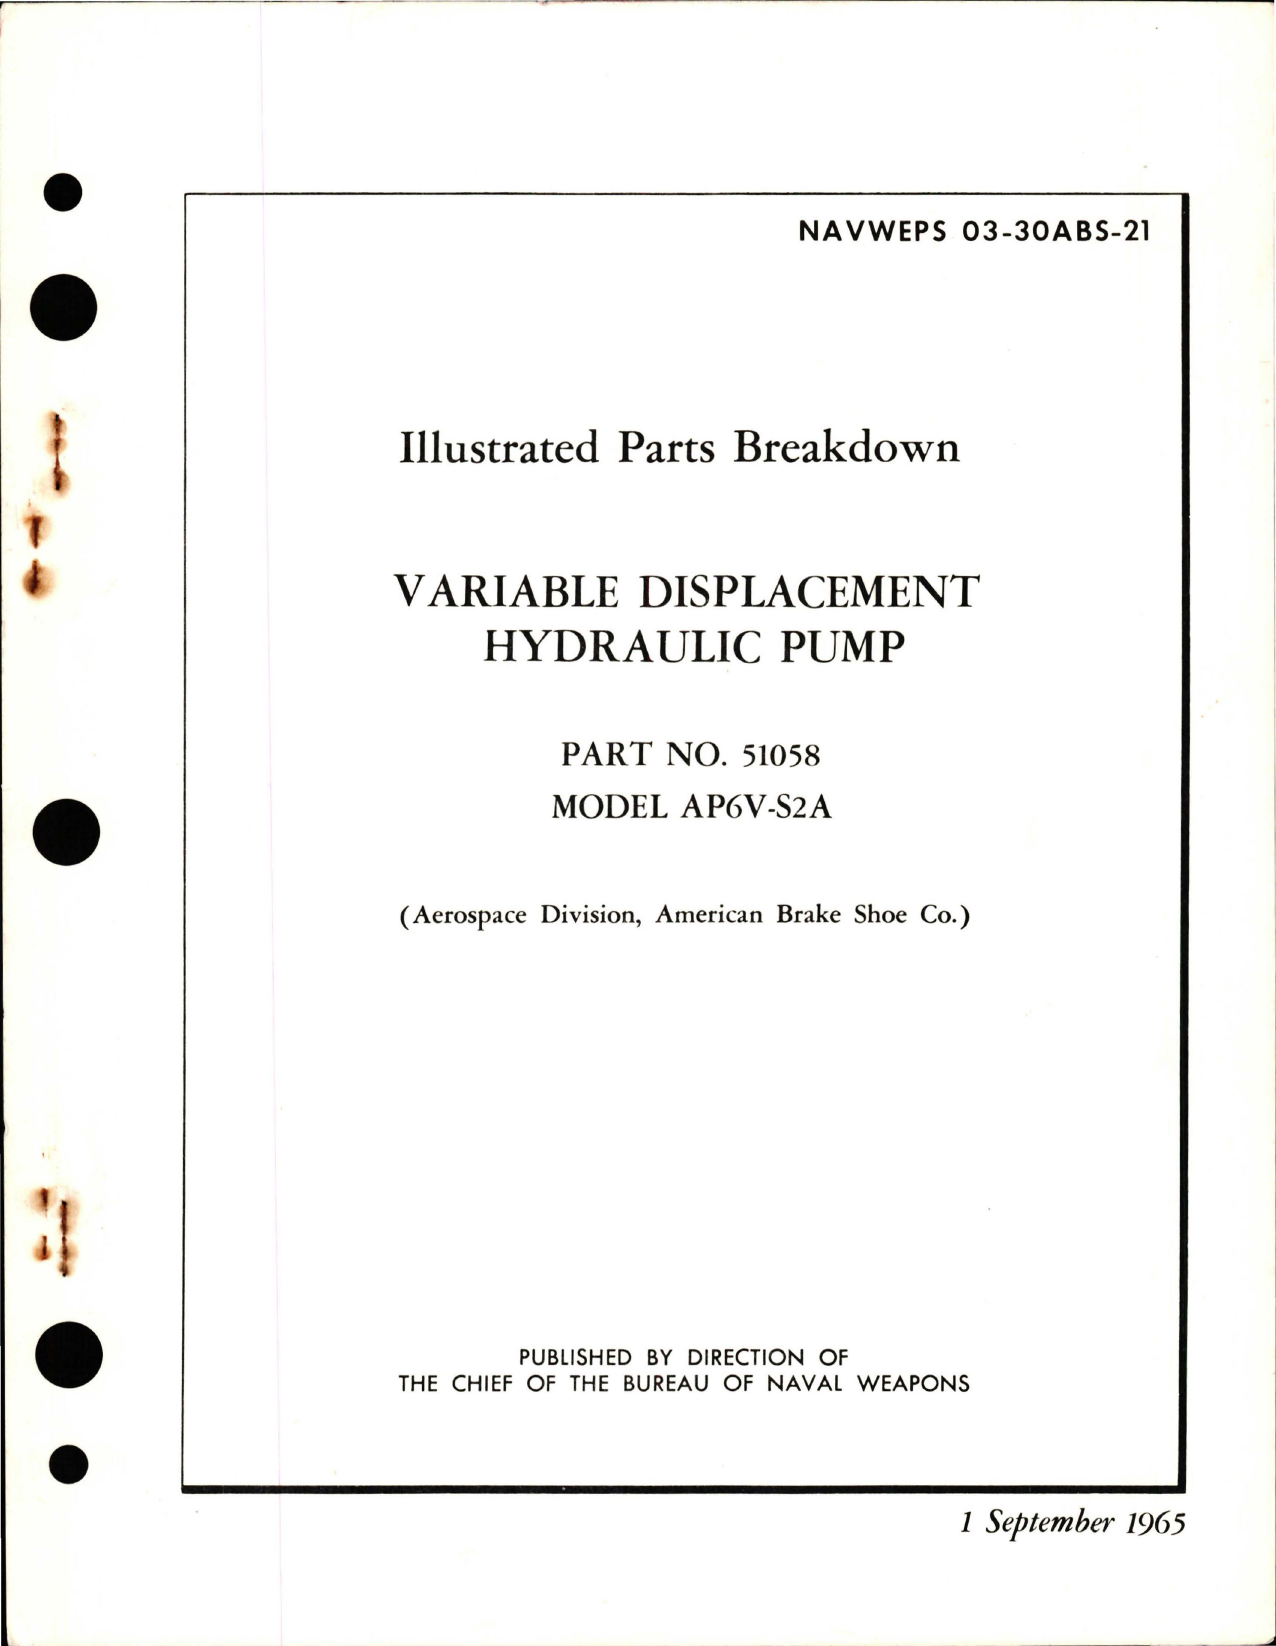 Sample page 1 from AirCorps Library document: Illustrated Parts Breakdown for Variable Displacement Hydraulic Pump - Part 51058 - Model AP6V-S2A